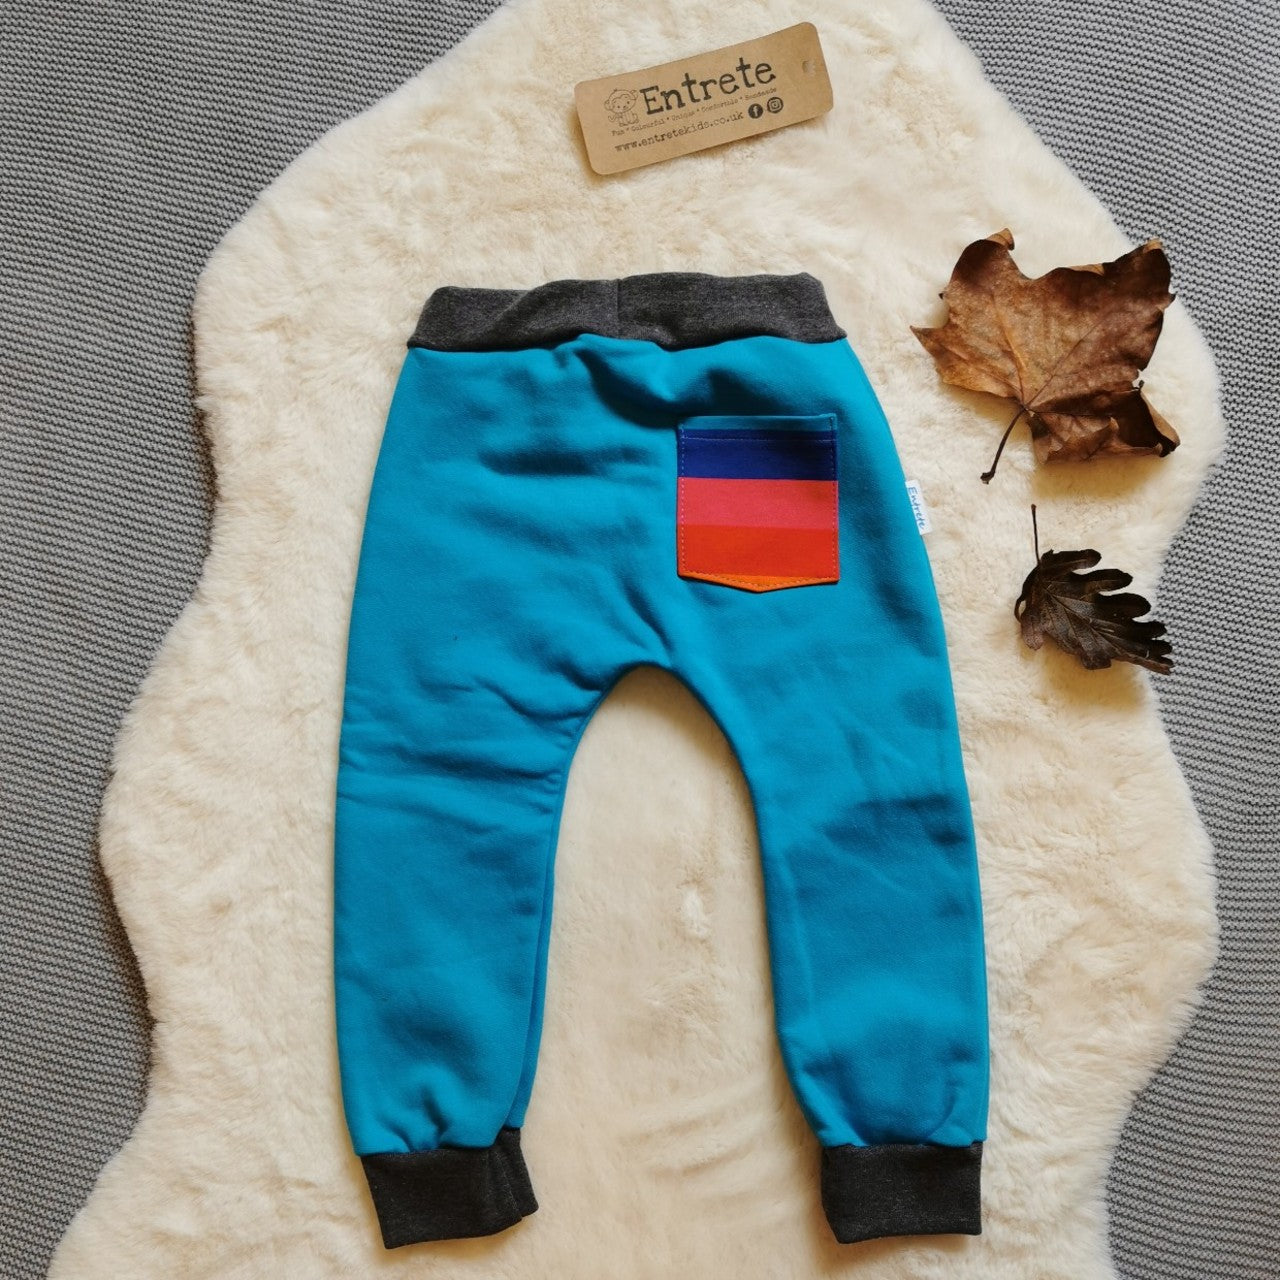 Rear view of harem joggers with elasticated waist, dropped crotch and roll-able ankle cuffs. Handmade using warm and vibrant sky blue cotton sweatshirt fleece, graphite ribbing and rainbow striped cotton jersey for the pocket.